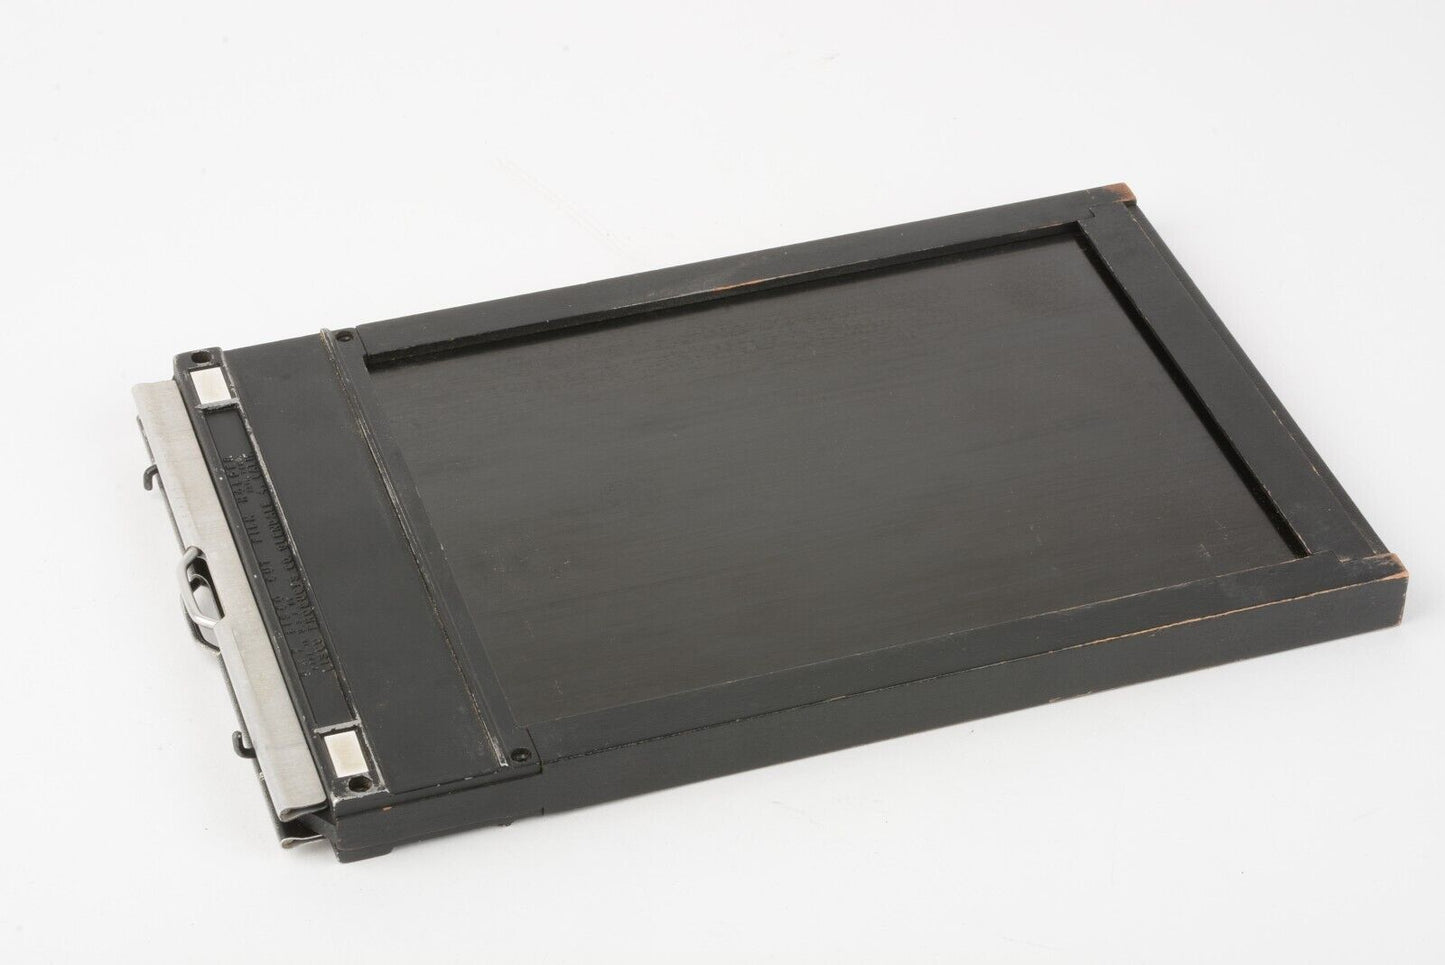 EXC++ LISCO 5x7 BLACK WOOD FILM SHEET HOLDER, GREAT CONDITION, VERY CLEAN